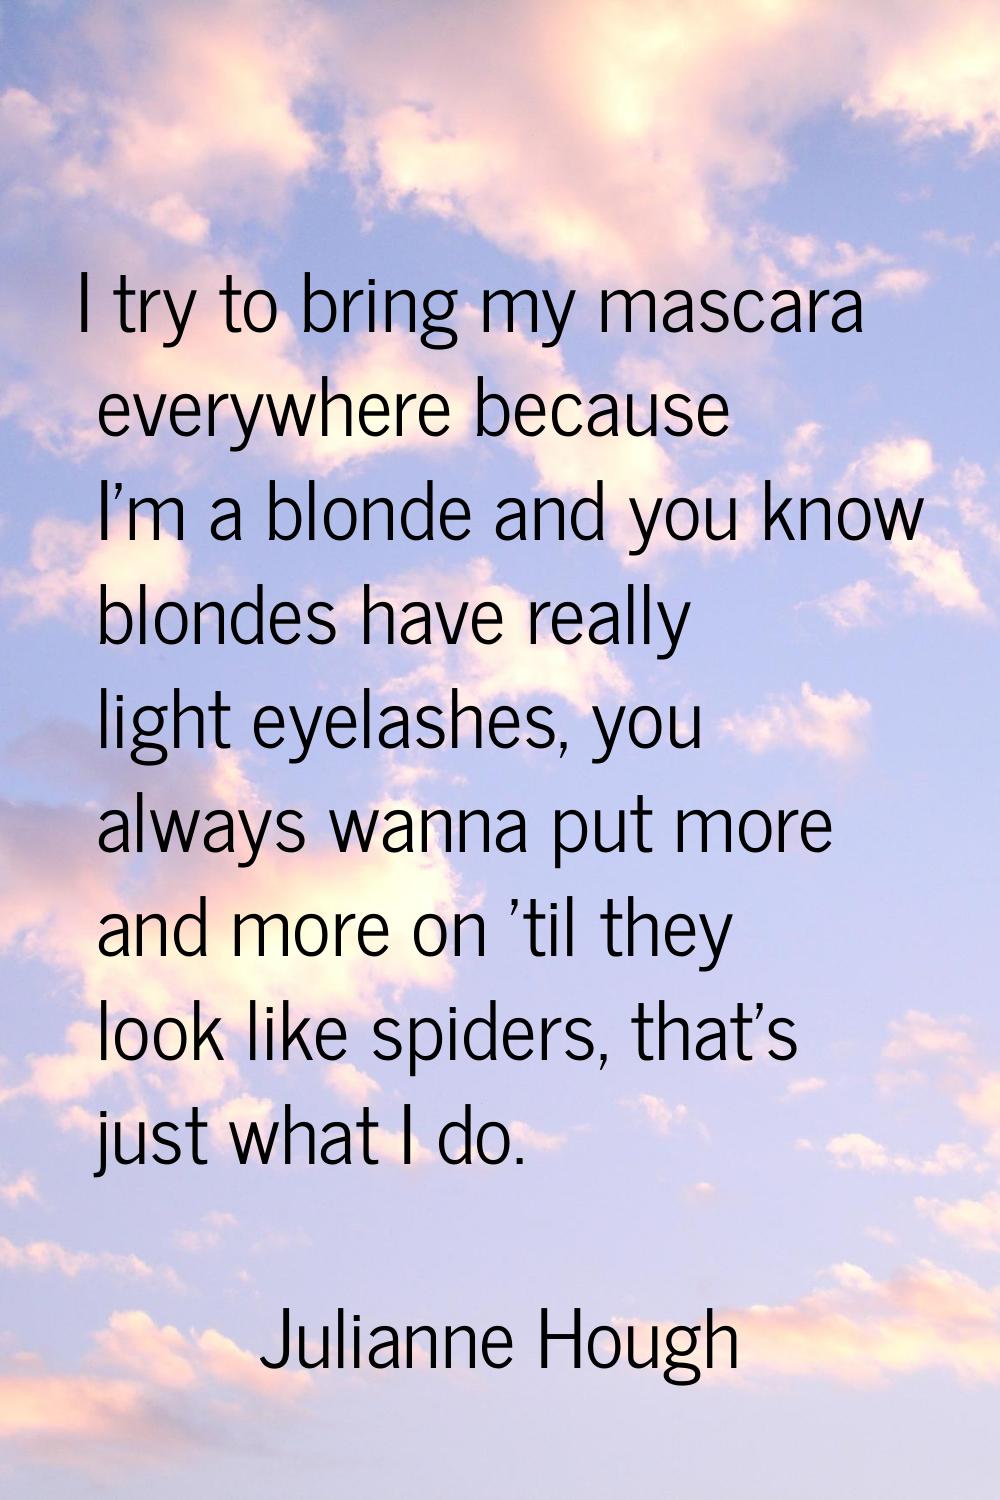 I try to bring my mascara everywhere because I'm a blonde and you know blondes have really light ey